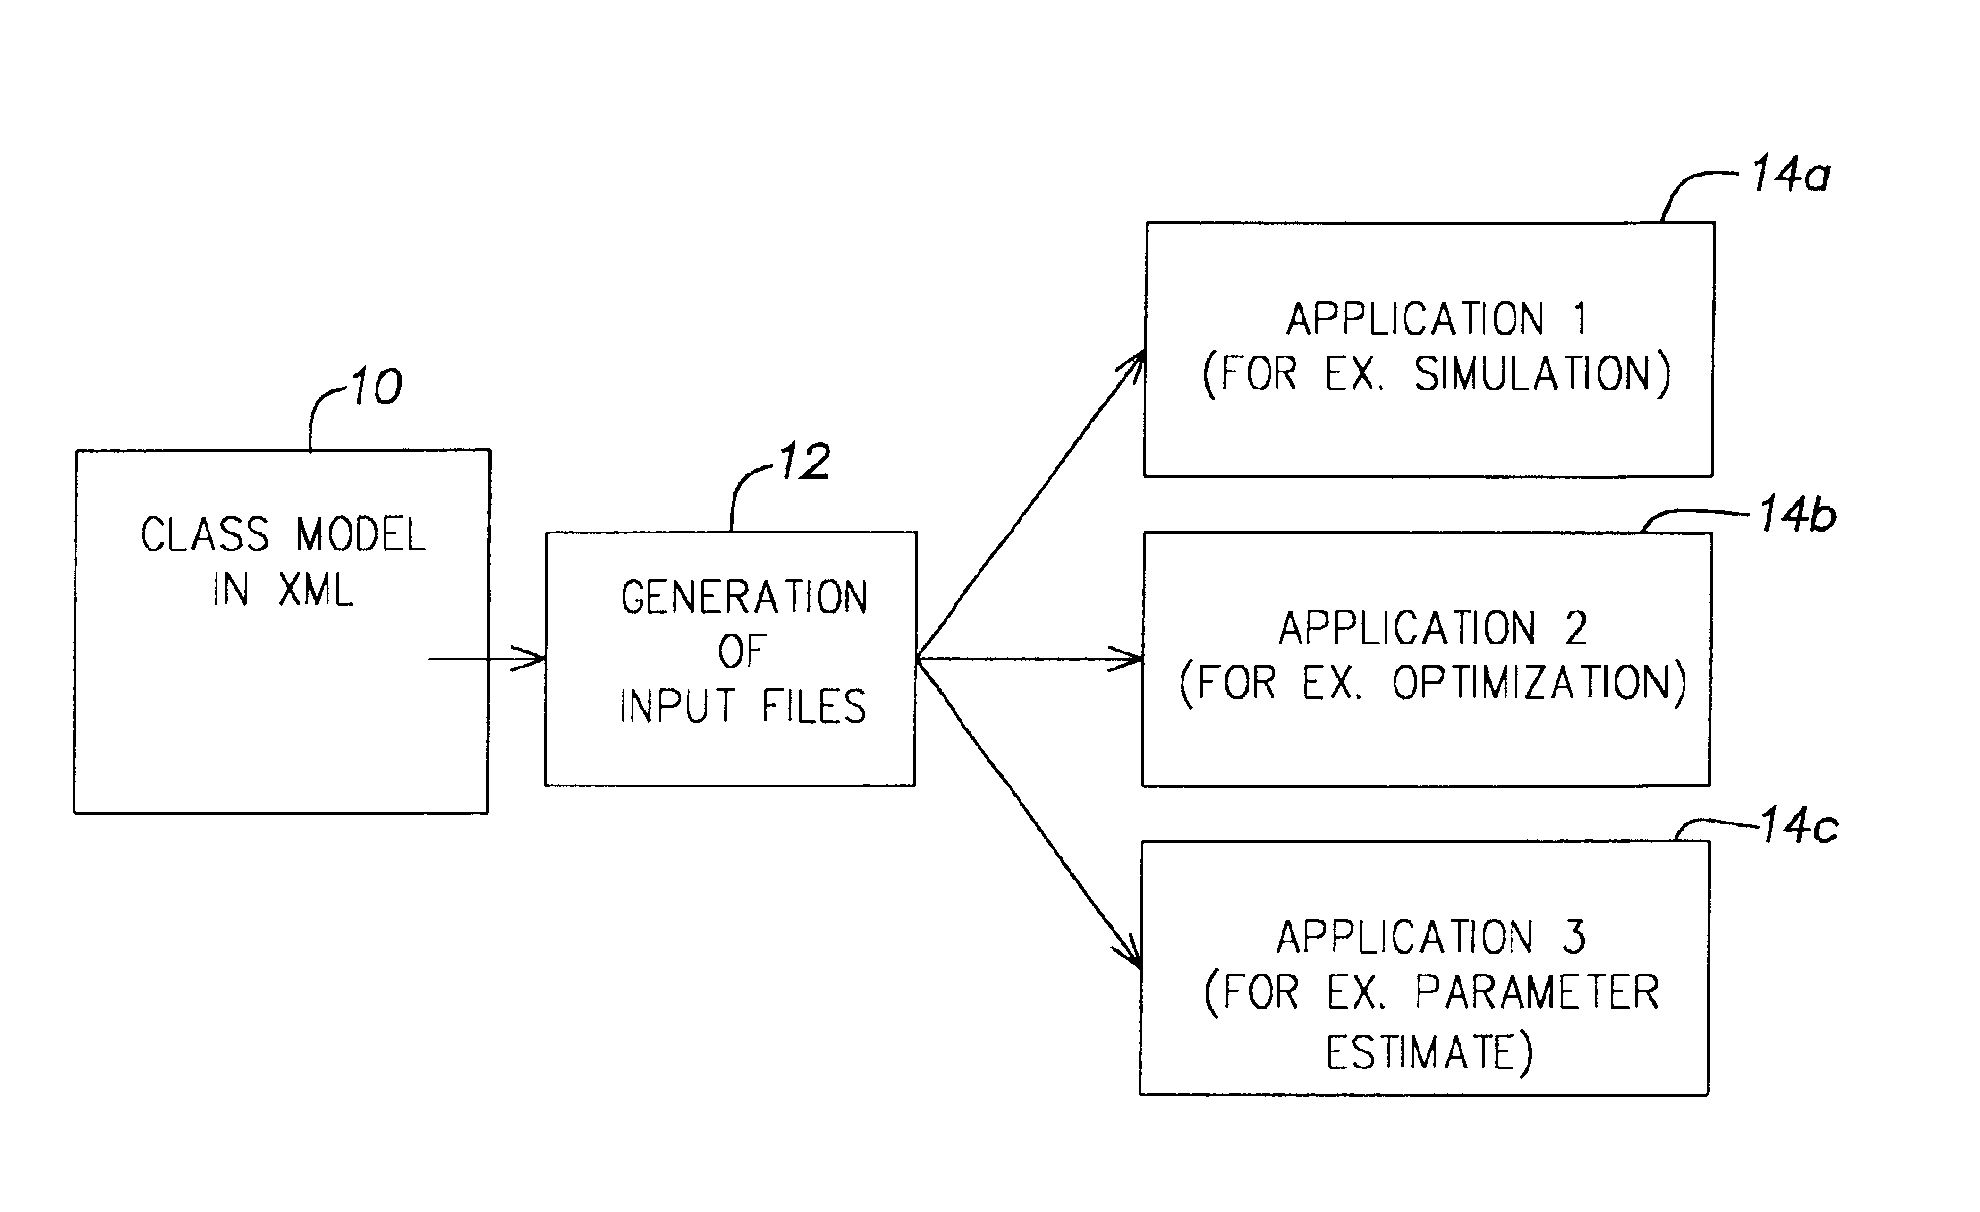 Method for generating application specific input files